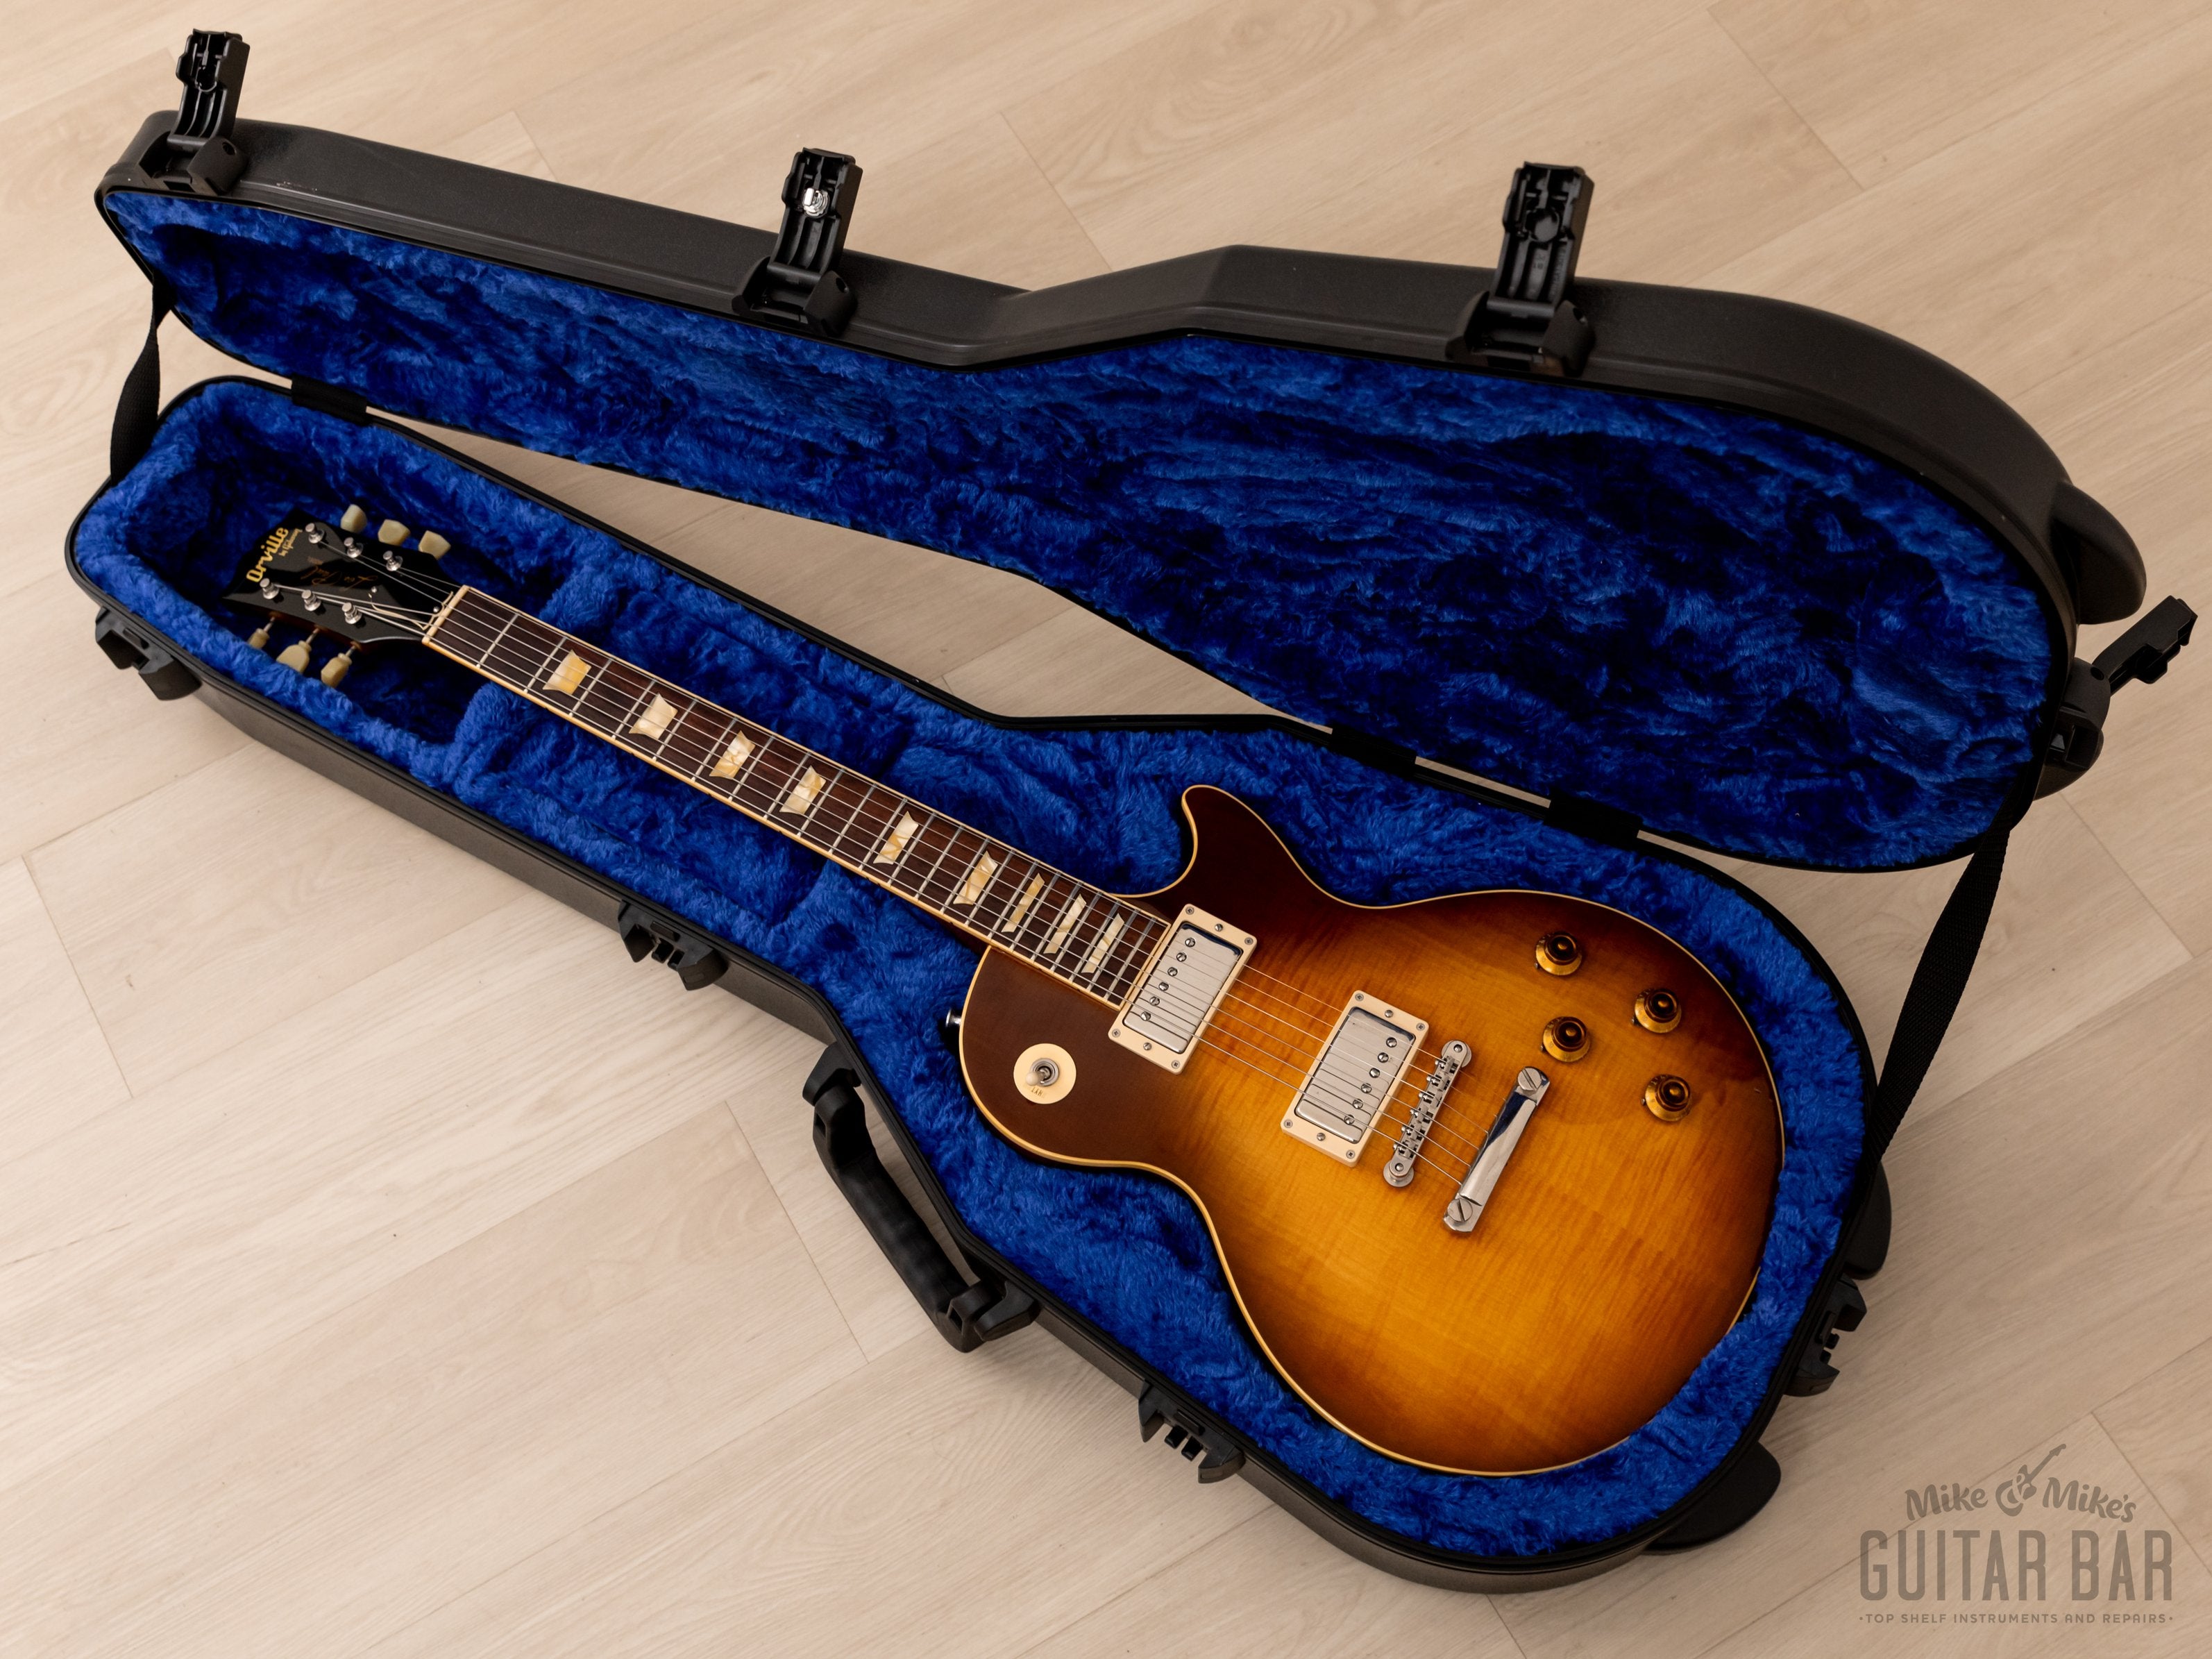 1993 Orville by Gibson Les Paul Standard LPS-59R Honey Burst w/ 57 Classic PAFs, Case